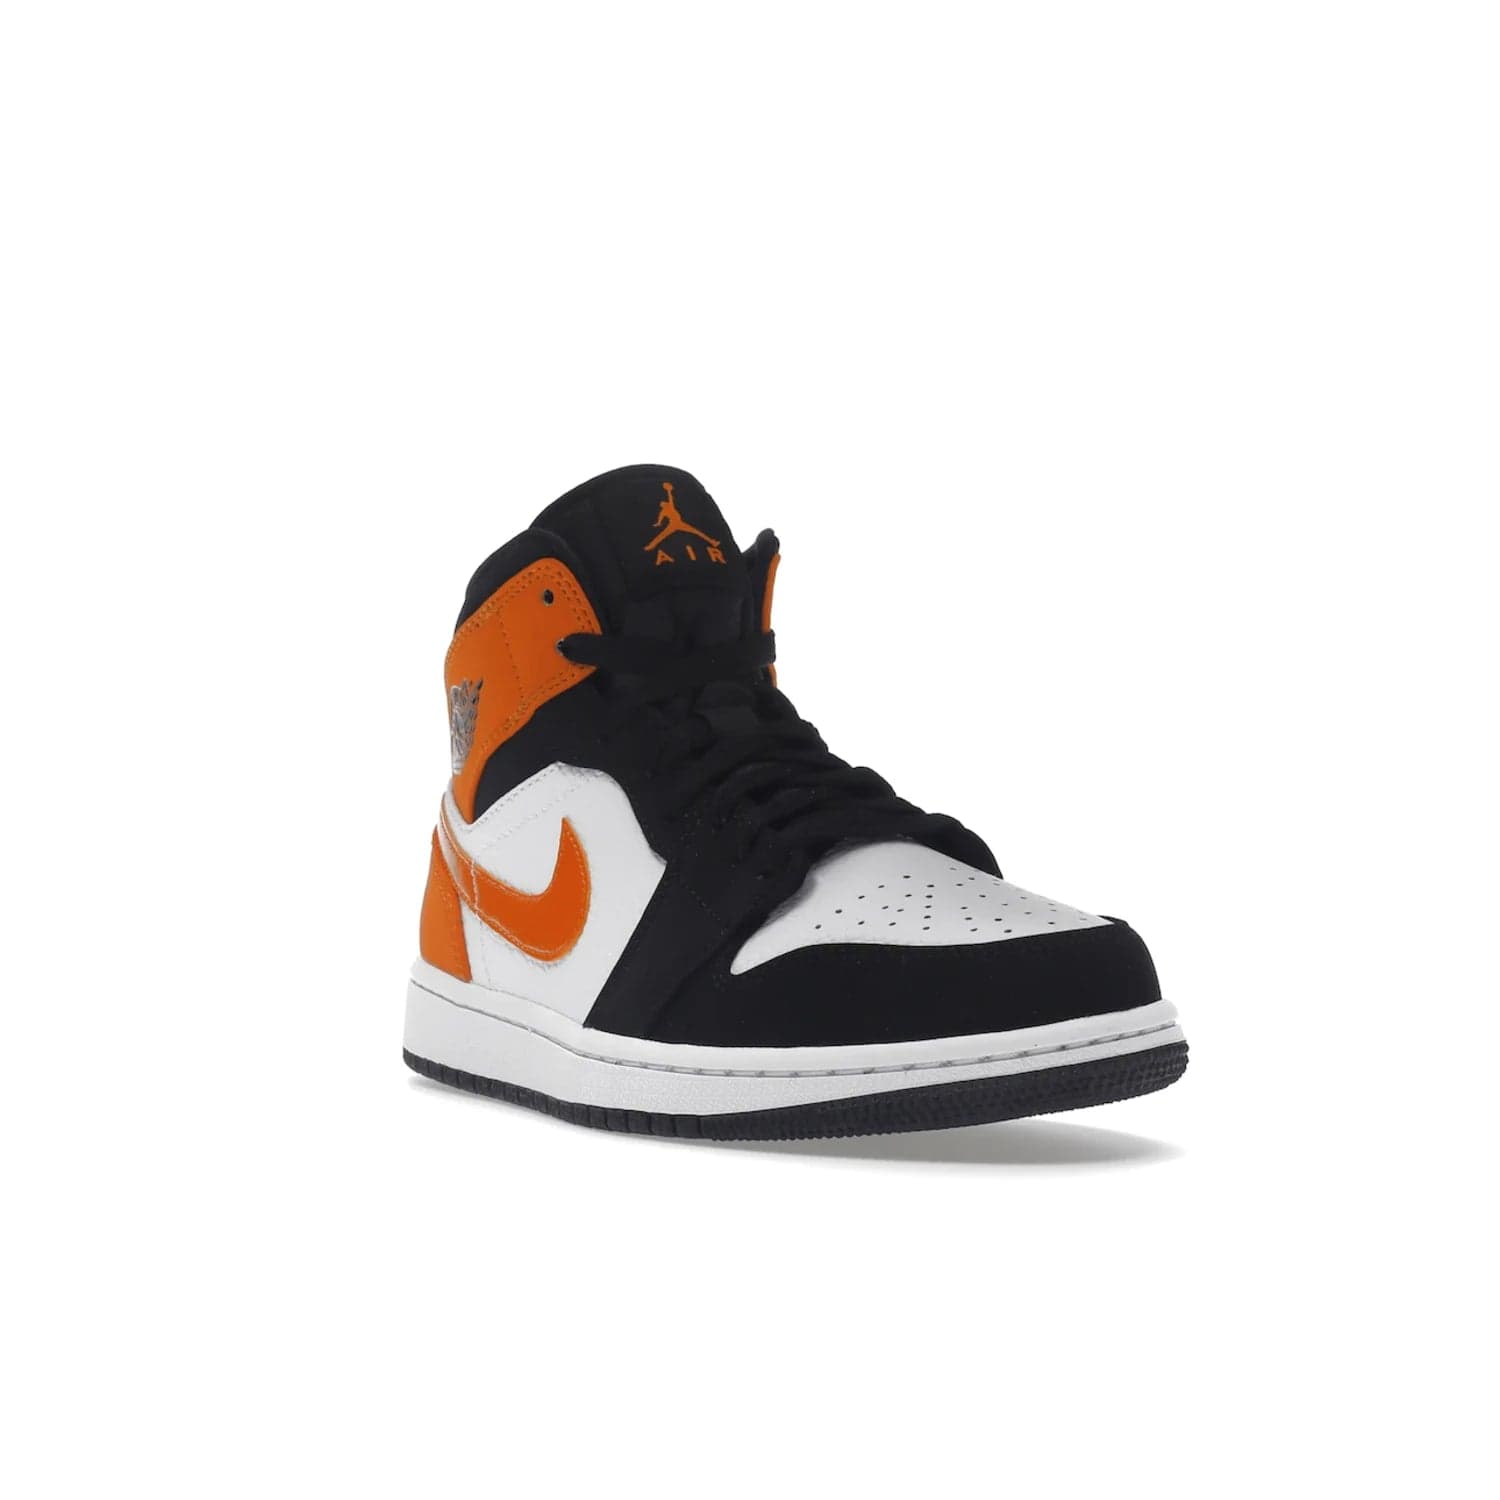 Jordan 1 Mid Shattered Backboard - Image 7 - Only at www.BallersClubKickz.com - The Air Jordan 1 Mid Shattered Backboard offers a timeless Black/White-Starfish colorway. Classic Swoosh logo and AJ insignia plus a shatterd backboard graphic on the insole. Get your pair today!